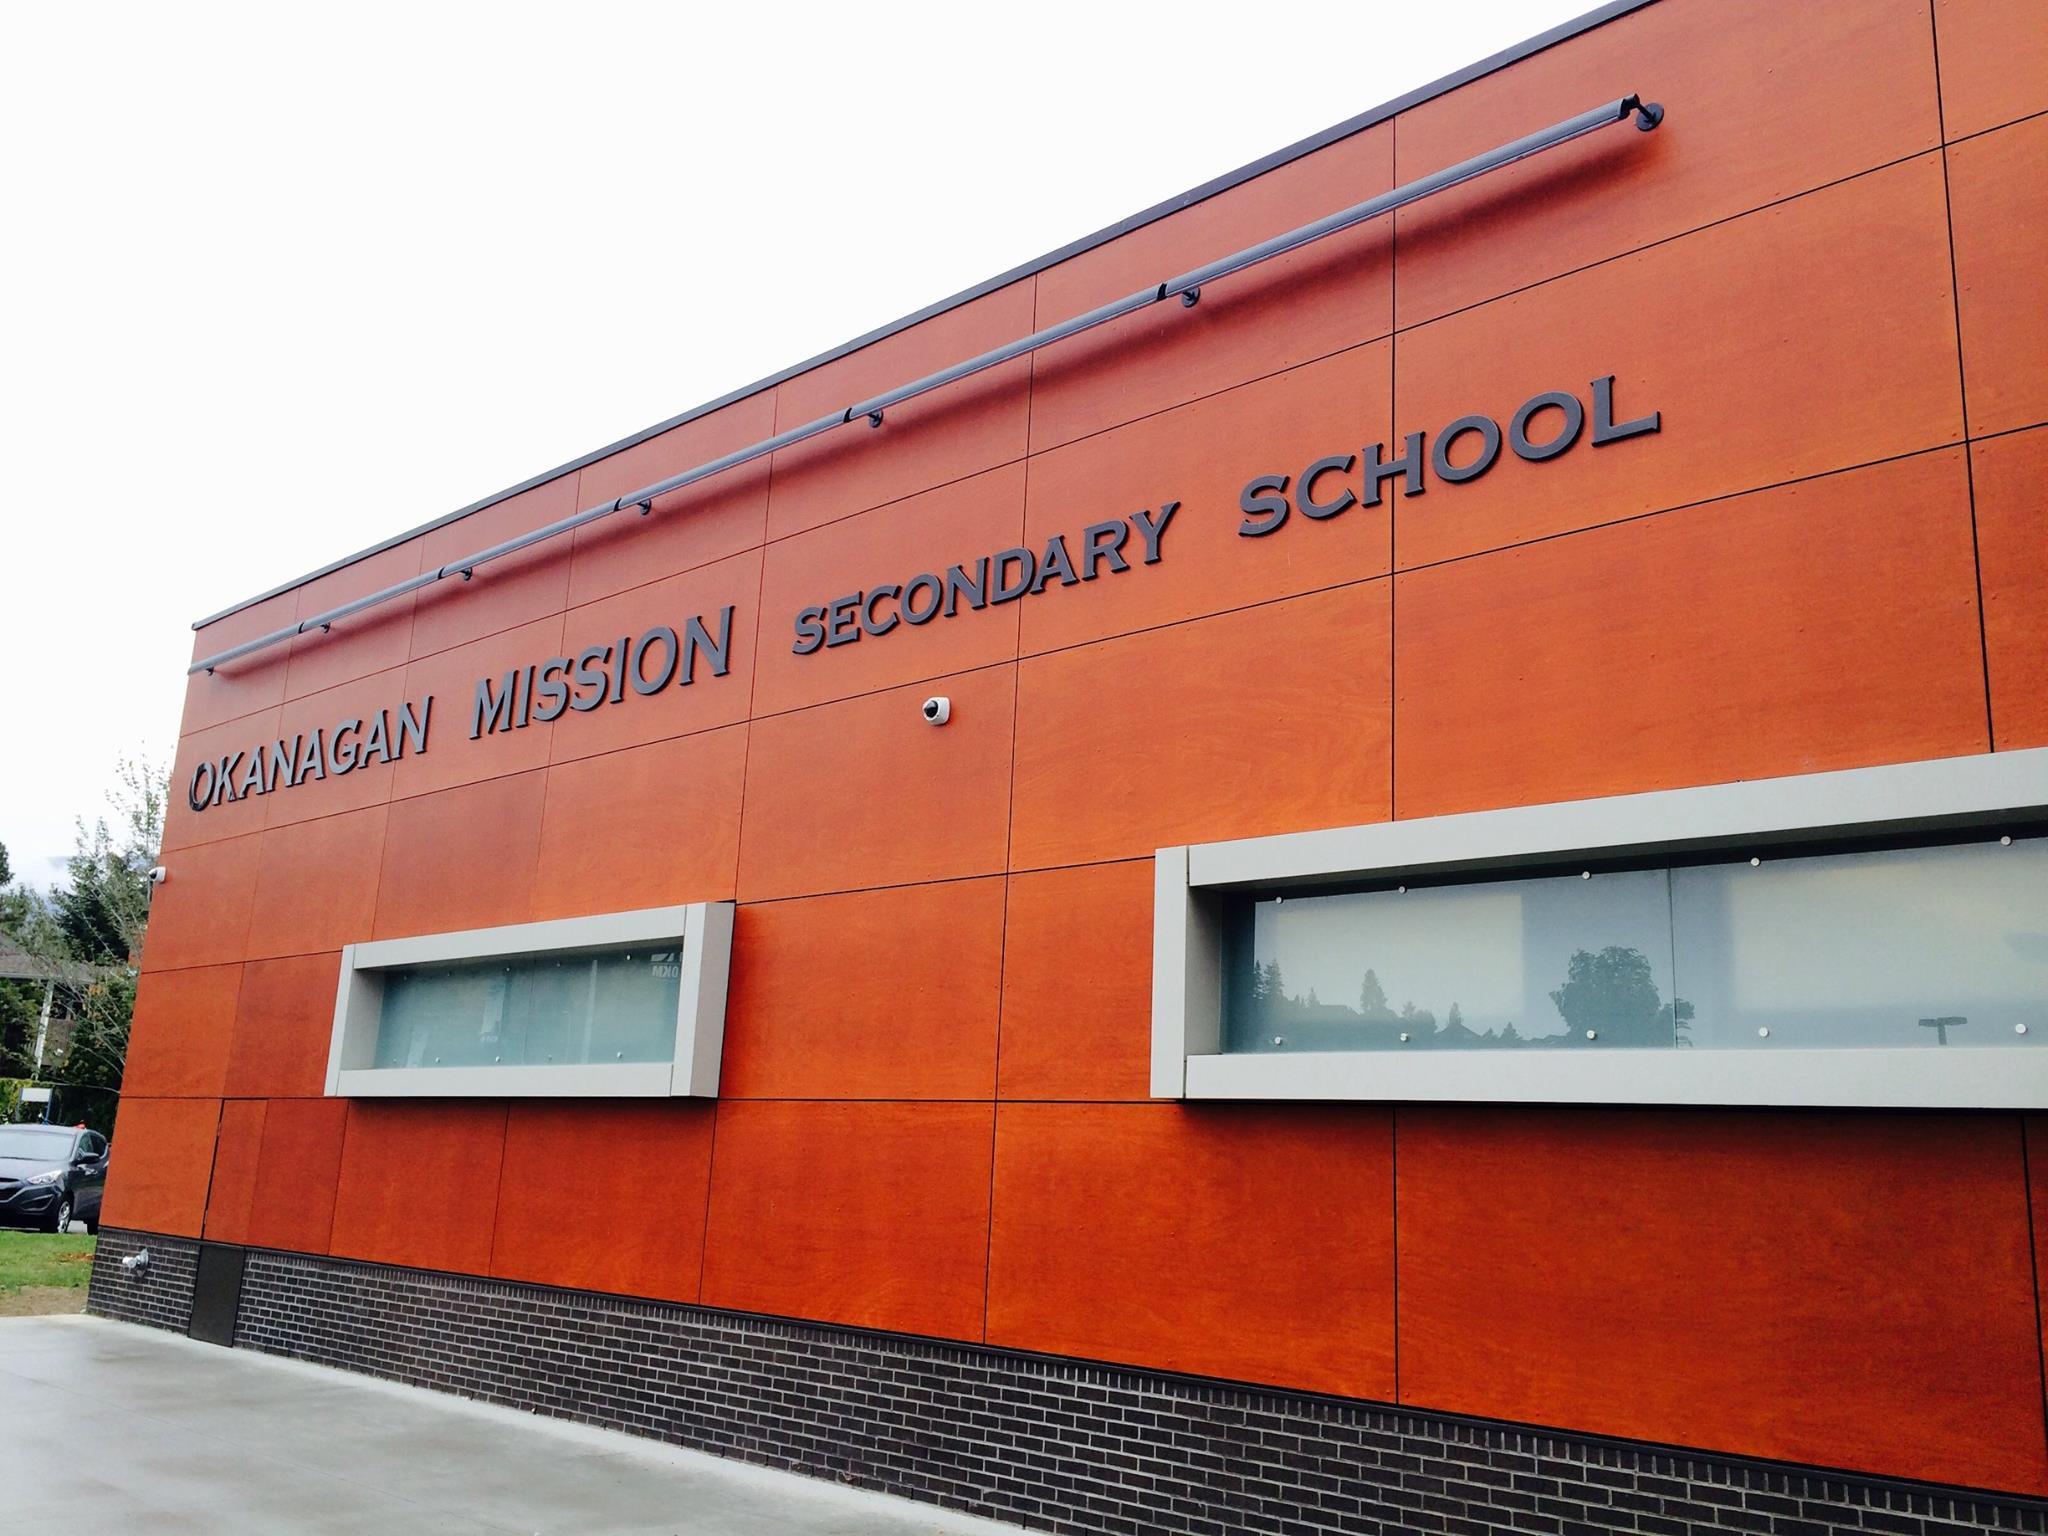 http://Okanagan%20Mission%20Secondary%20School%20Geothermal%20engineering%20project